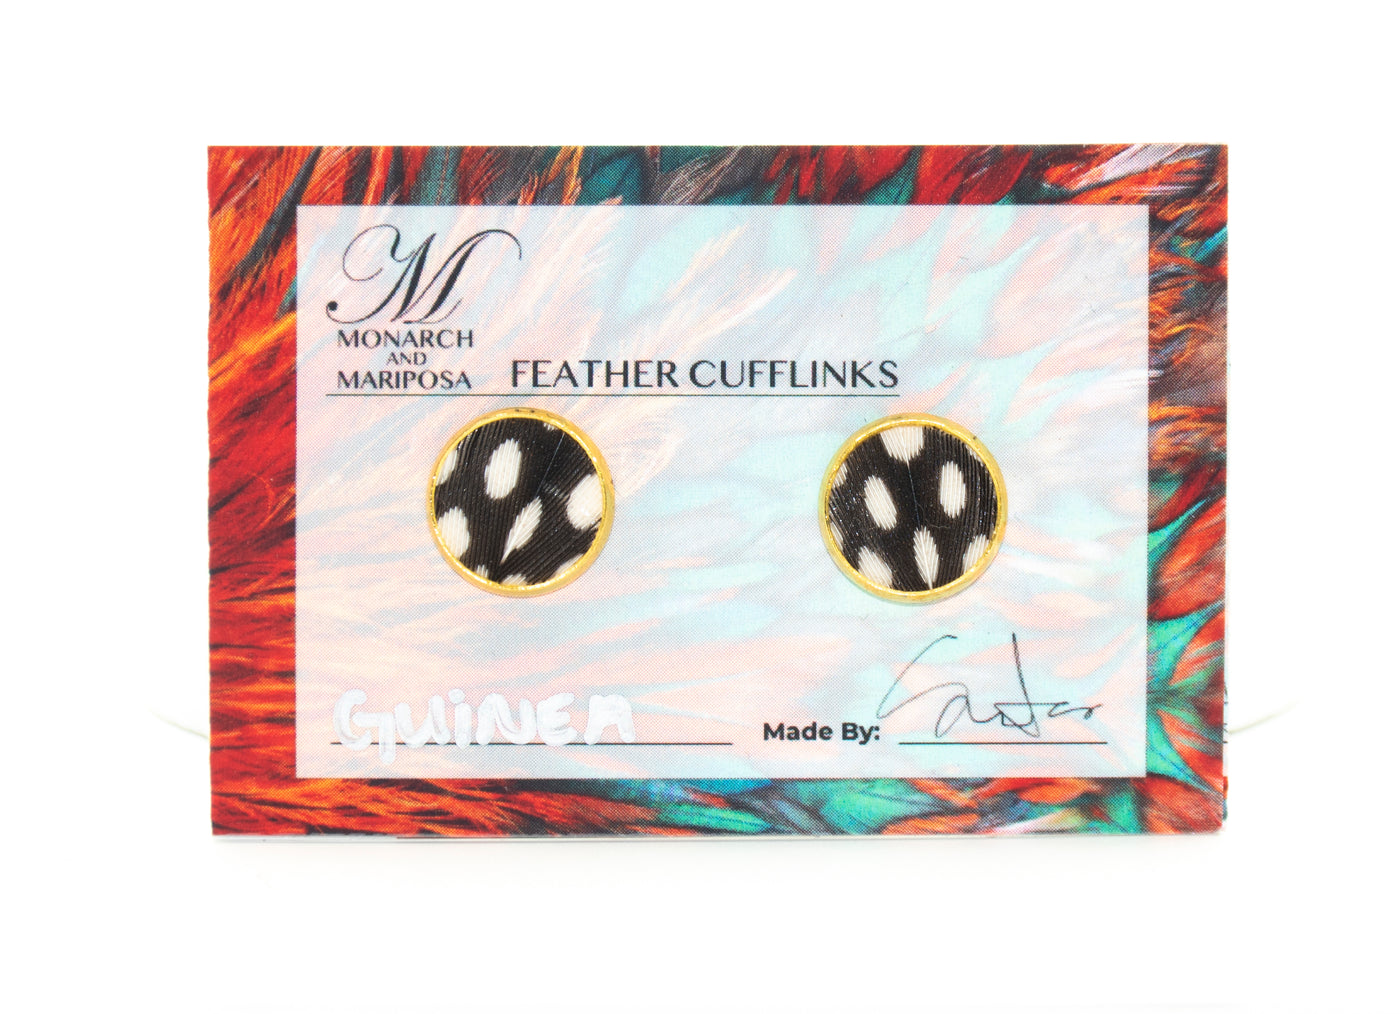 Gold Feather Cufflinks - Choose Style